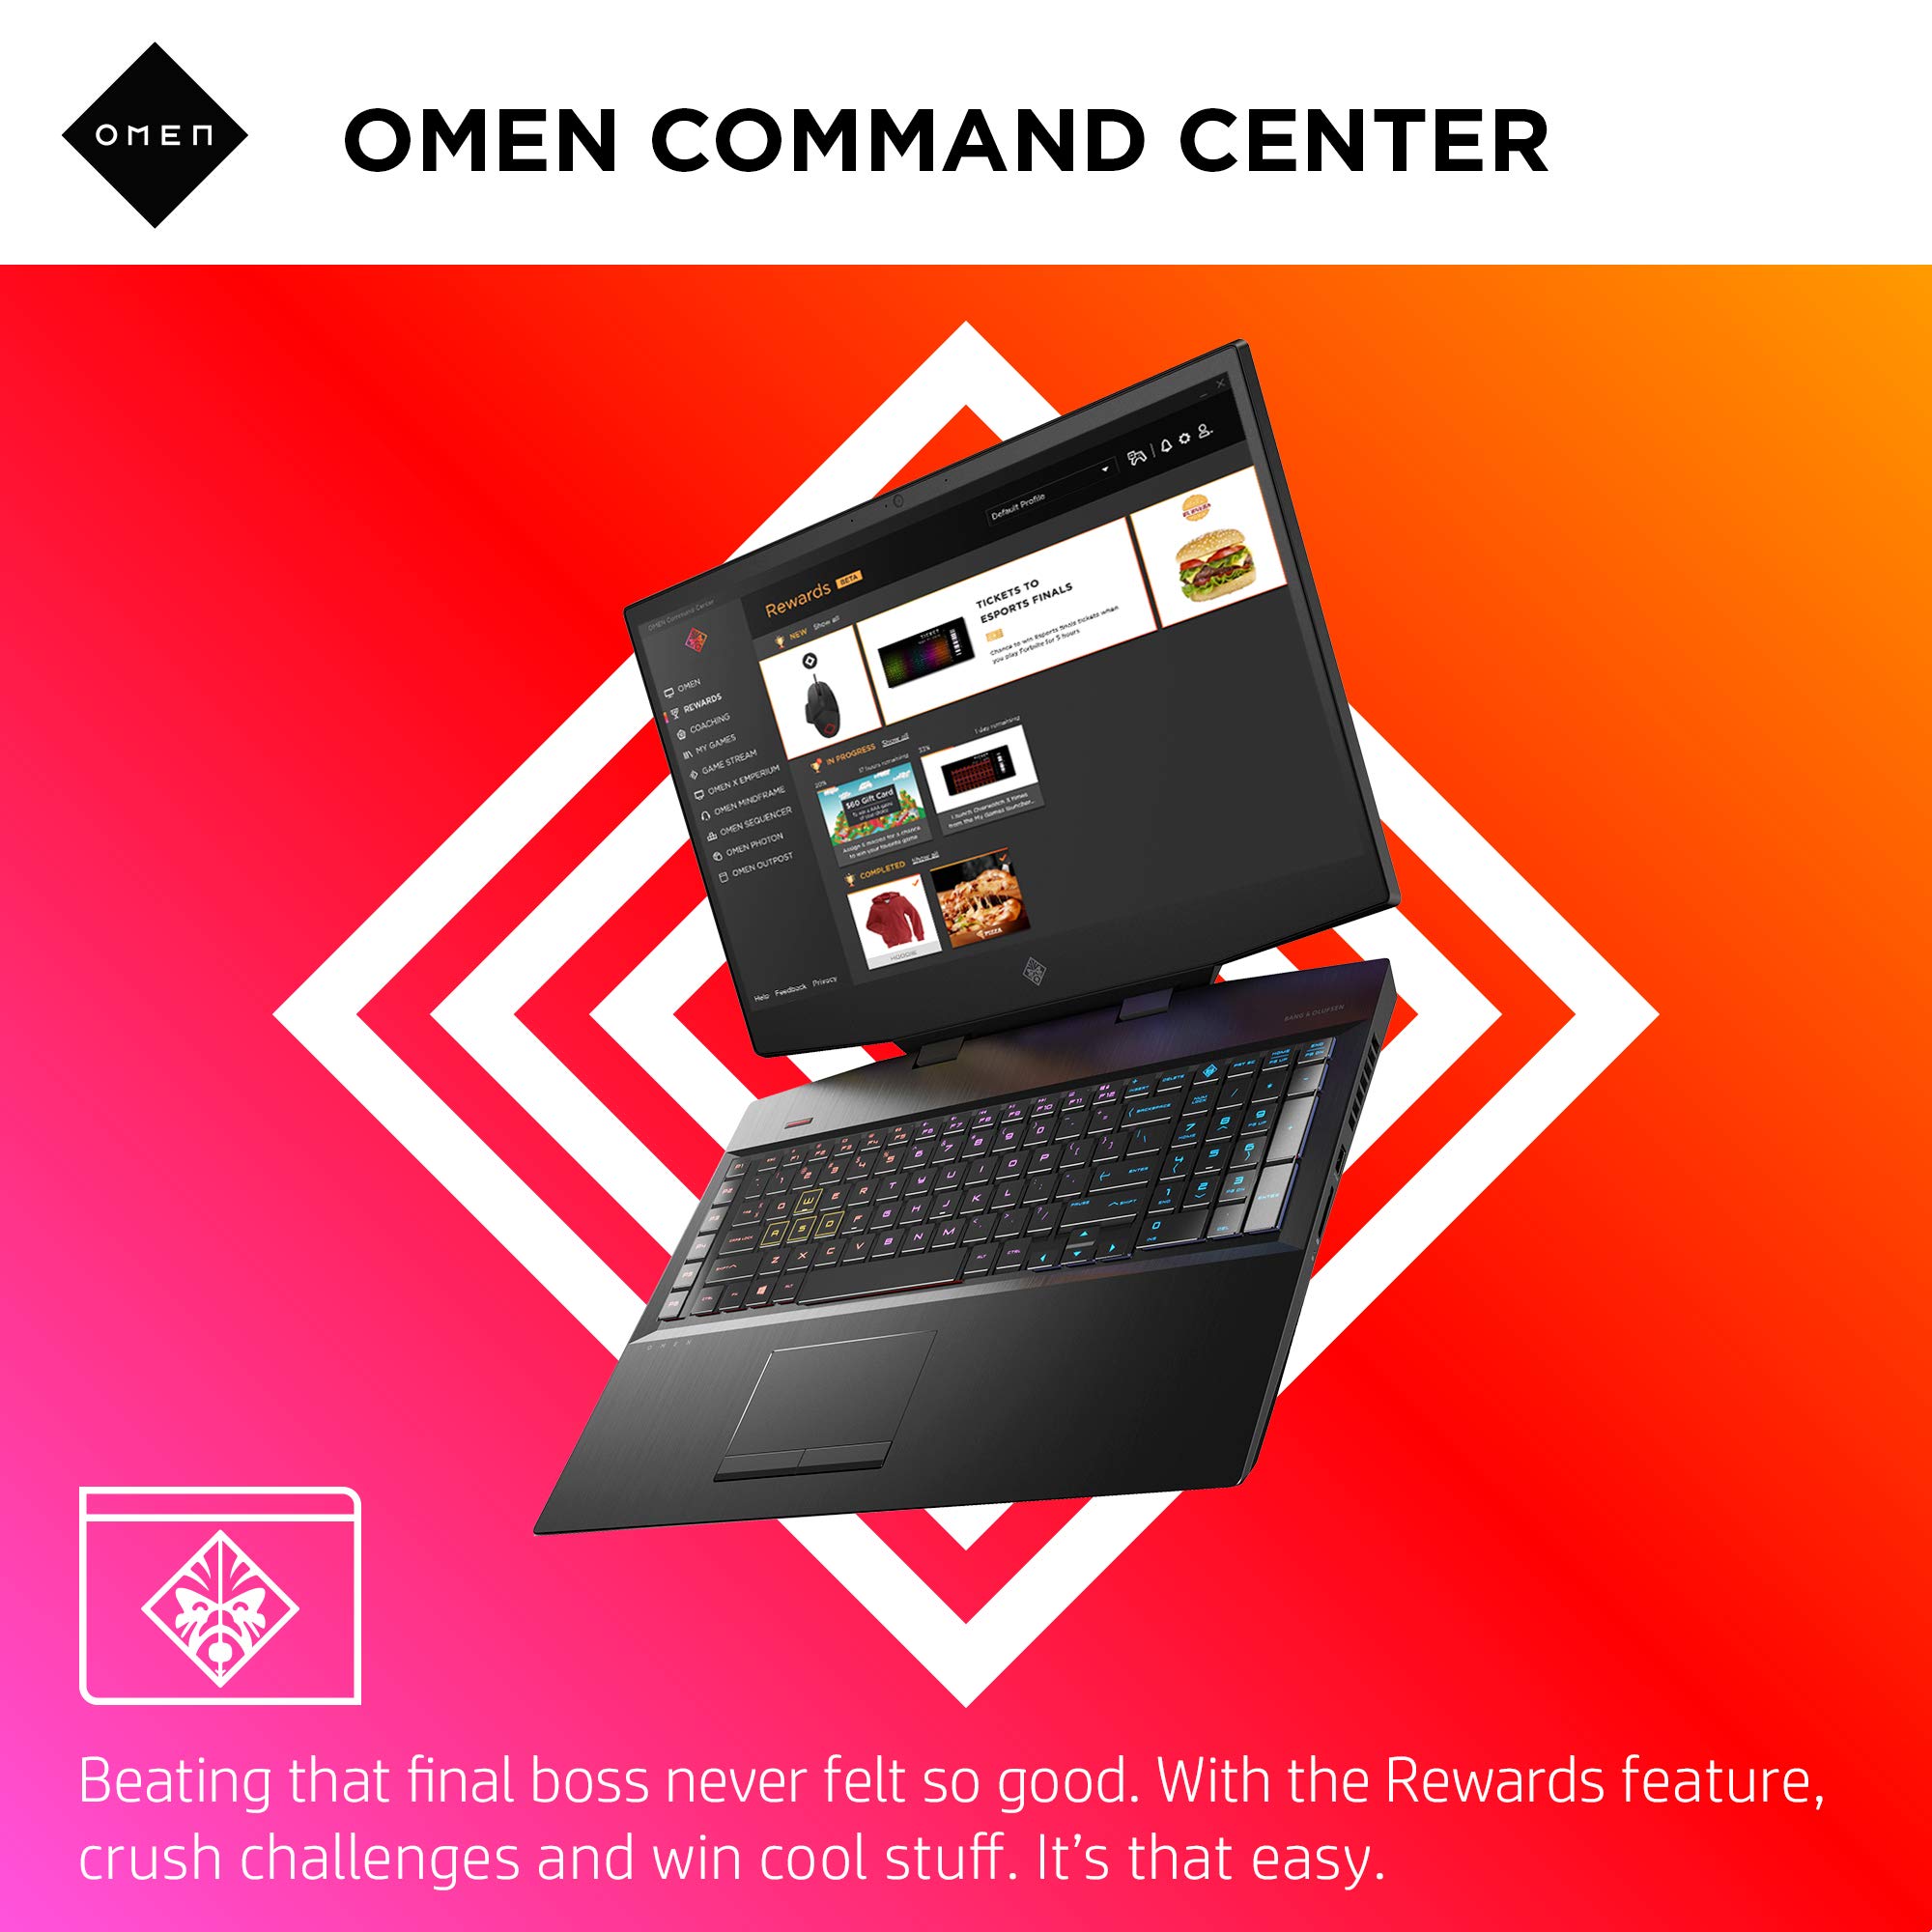 Check for any available updates for the HP Omen Command Center or keyboard drivers.
If updates are found, follow the on-screen instructions to install them.